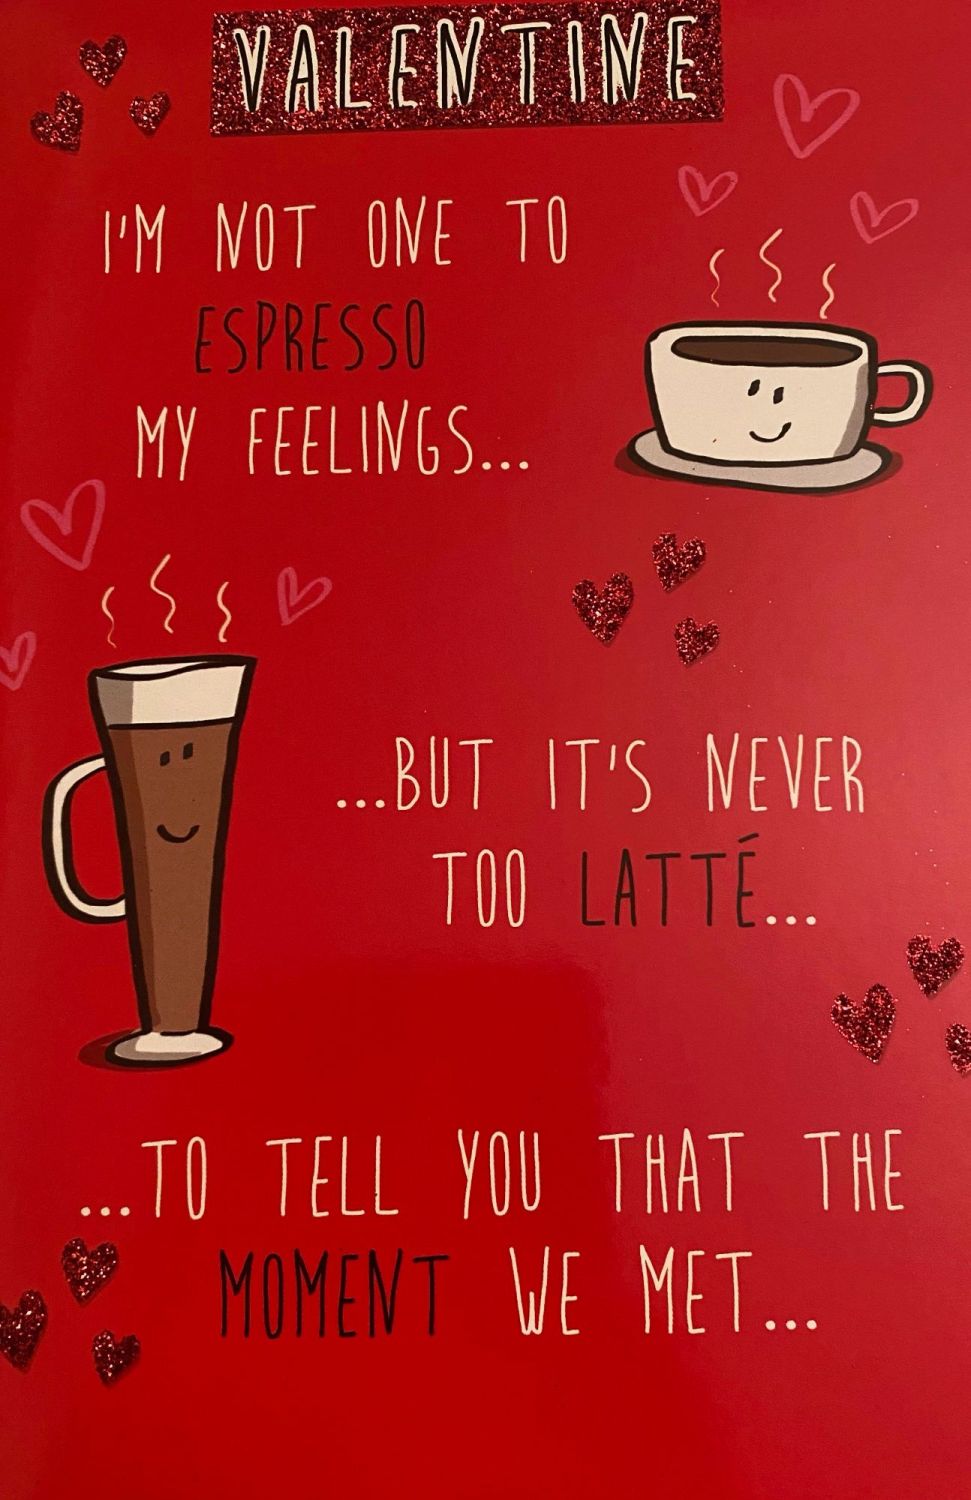 Valentine I'm Not One To Espresso My Feelings.... - Valentine's Day Card